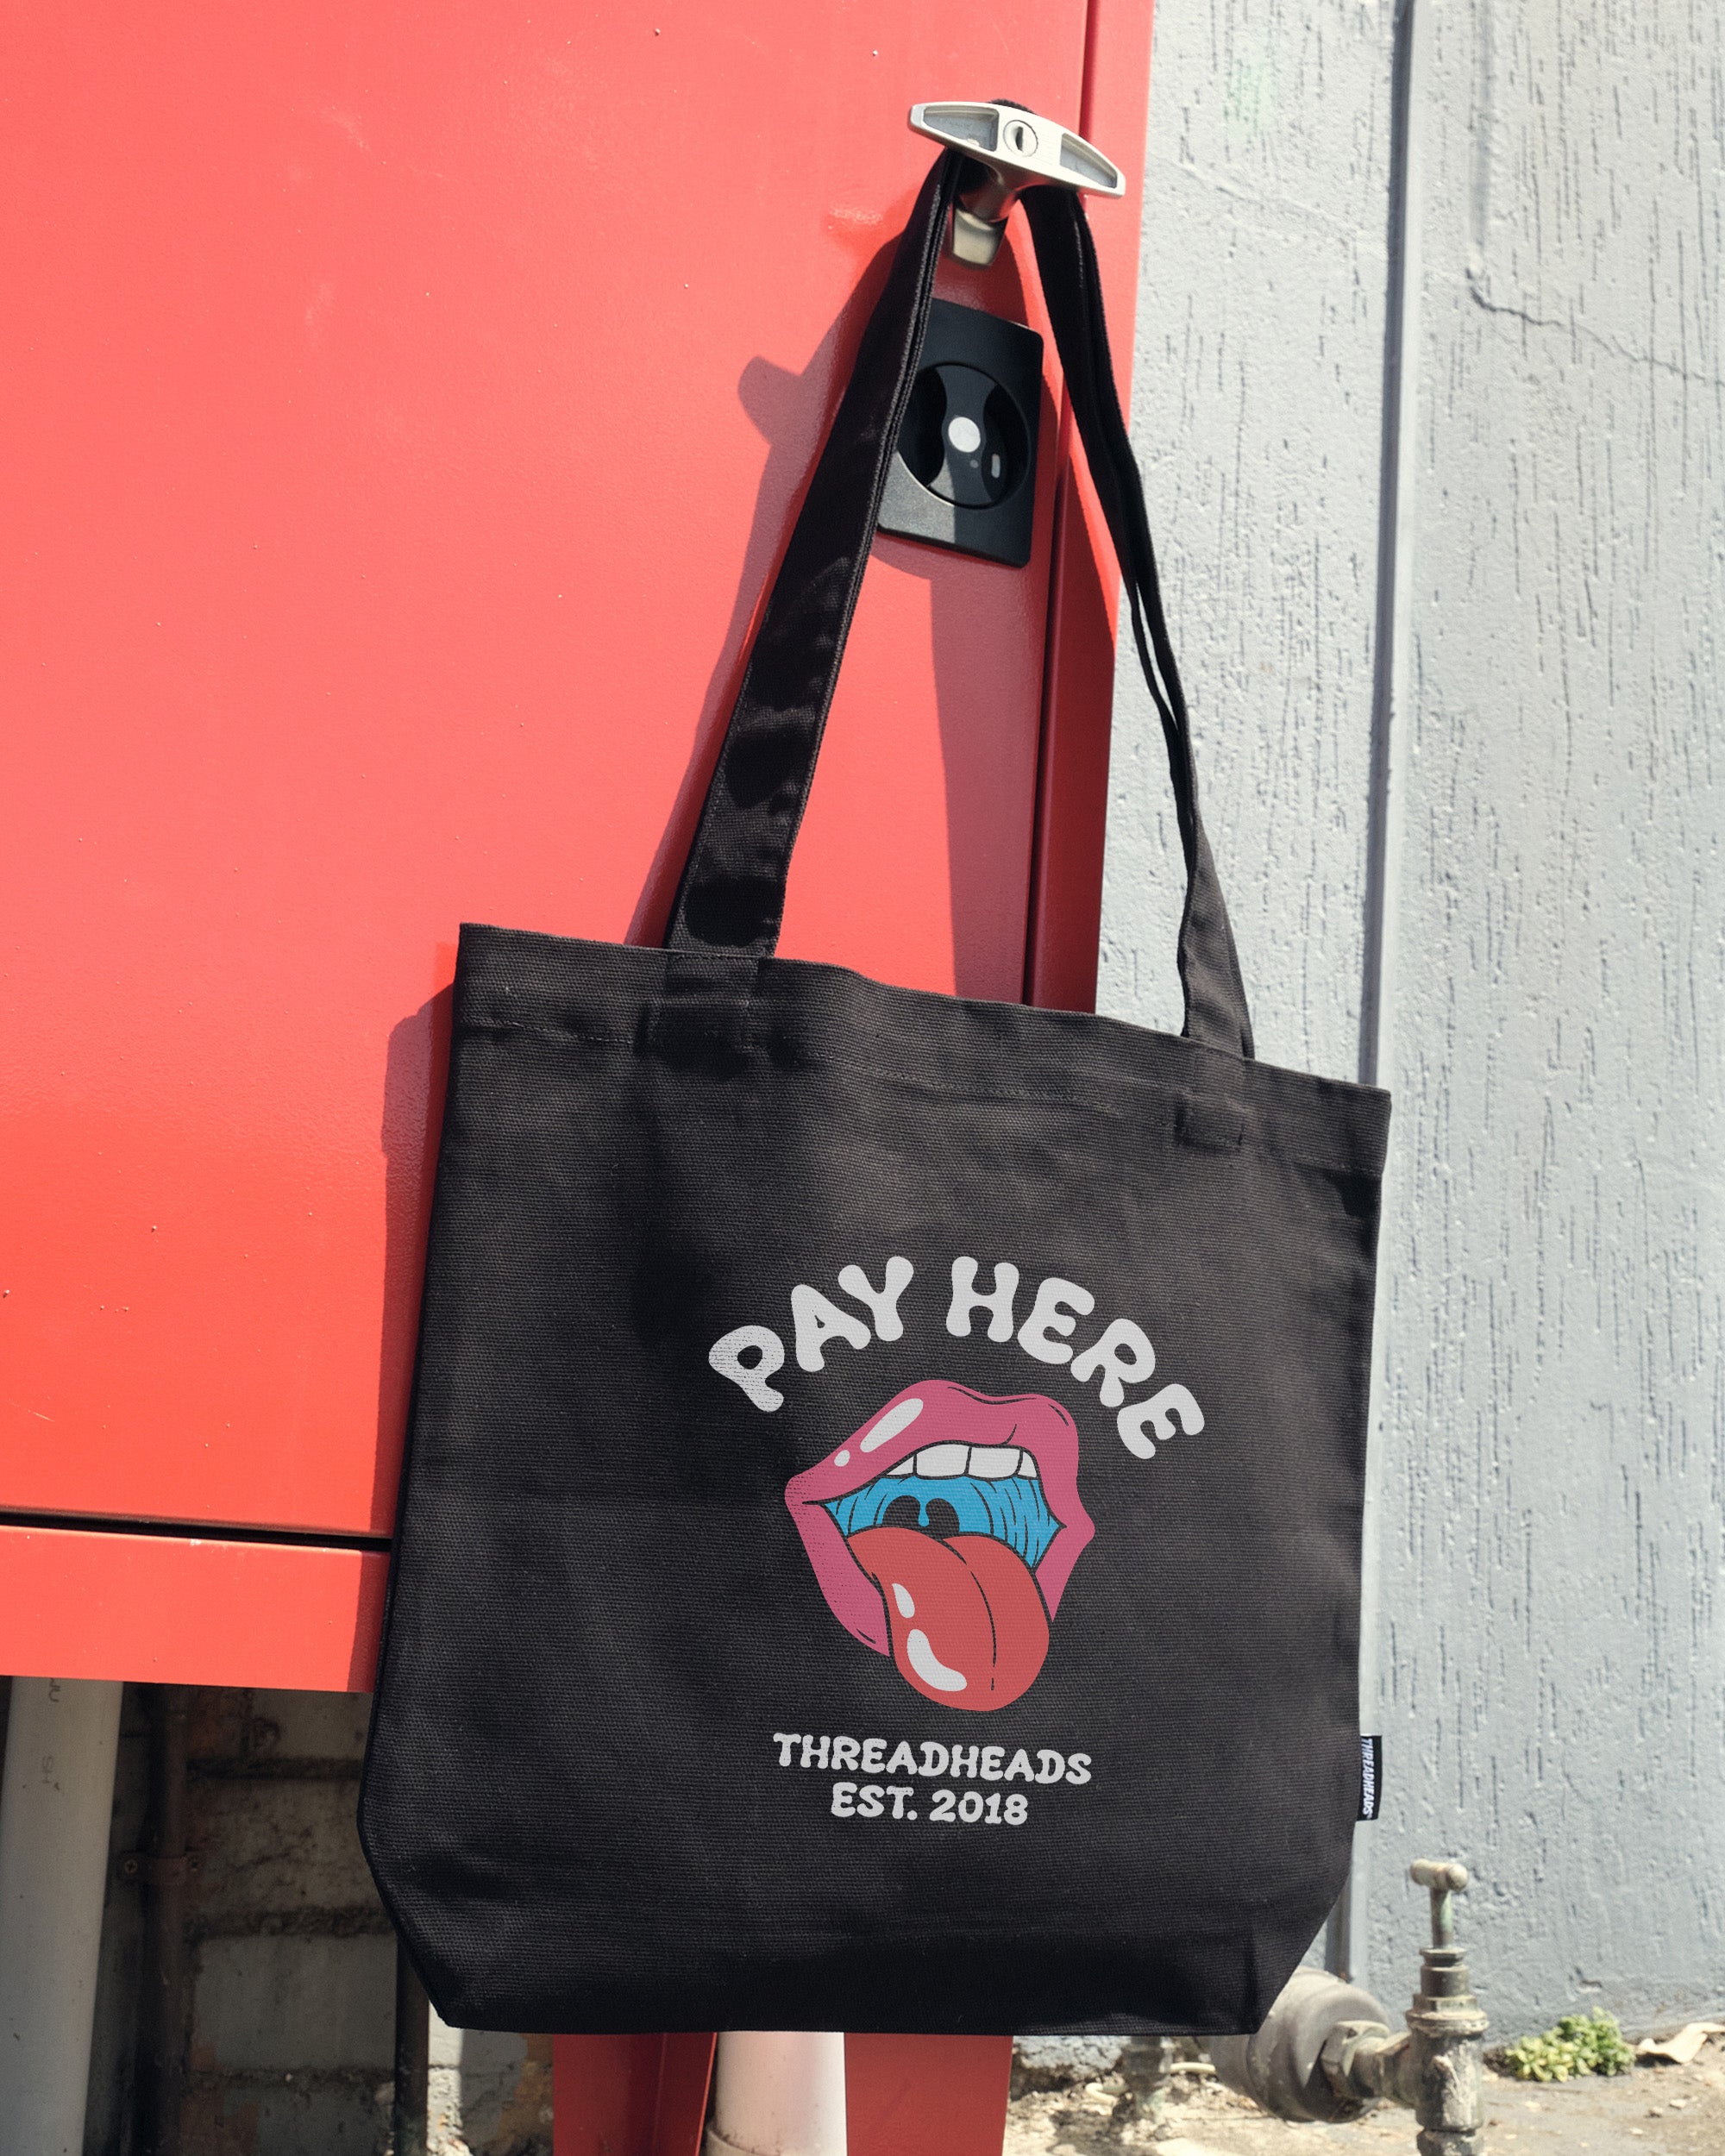 Pay Here Tote Bag